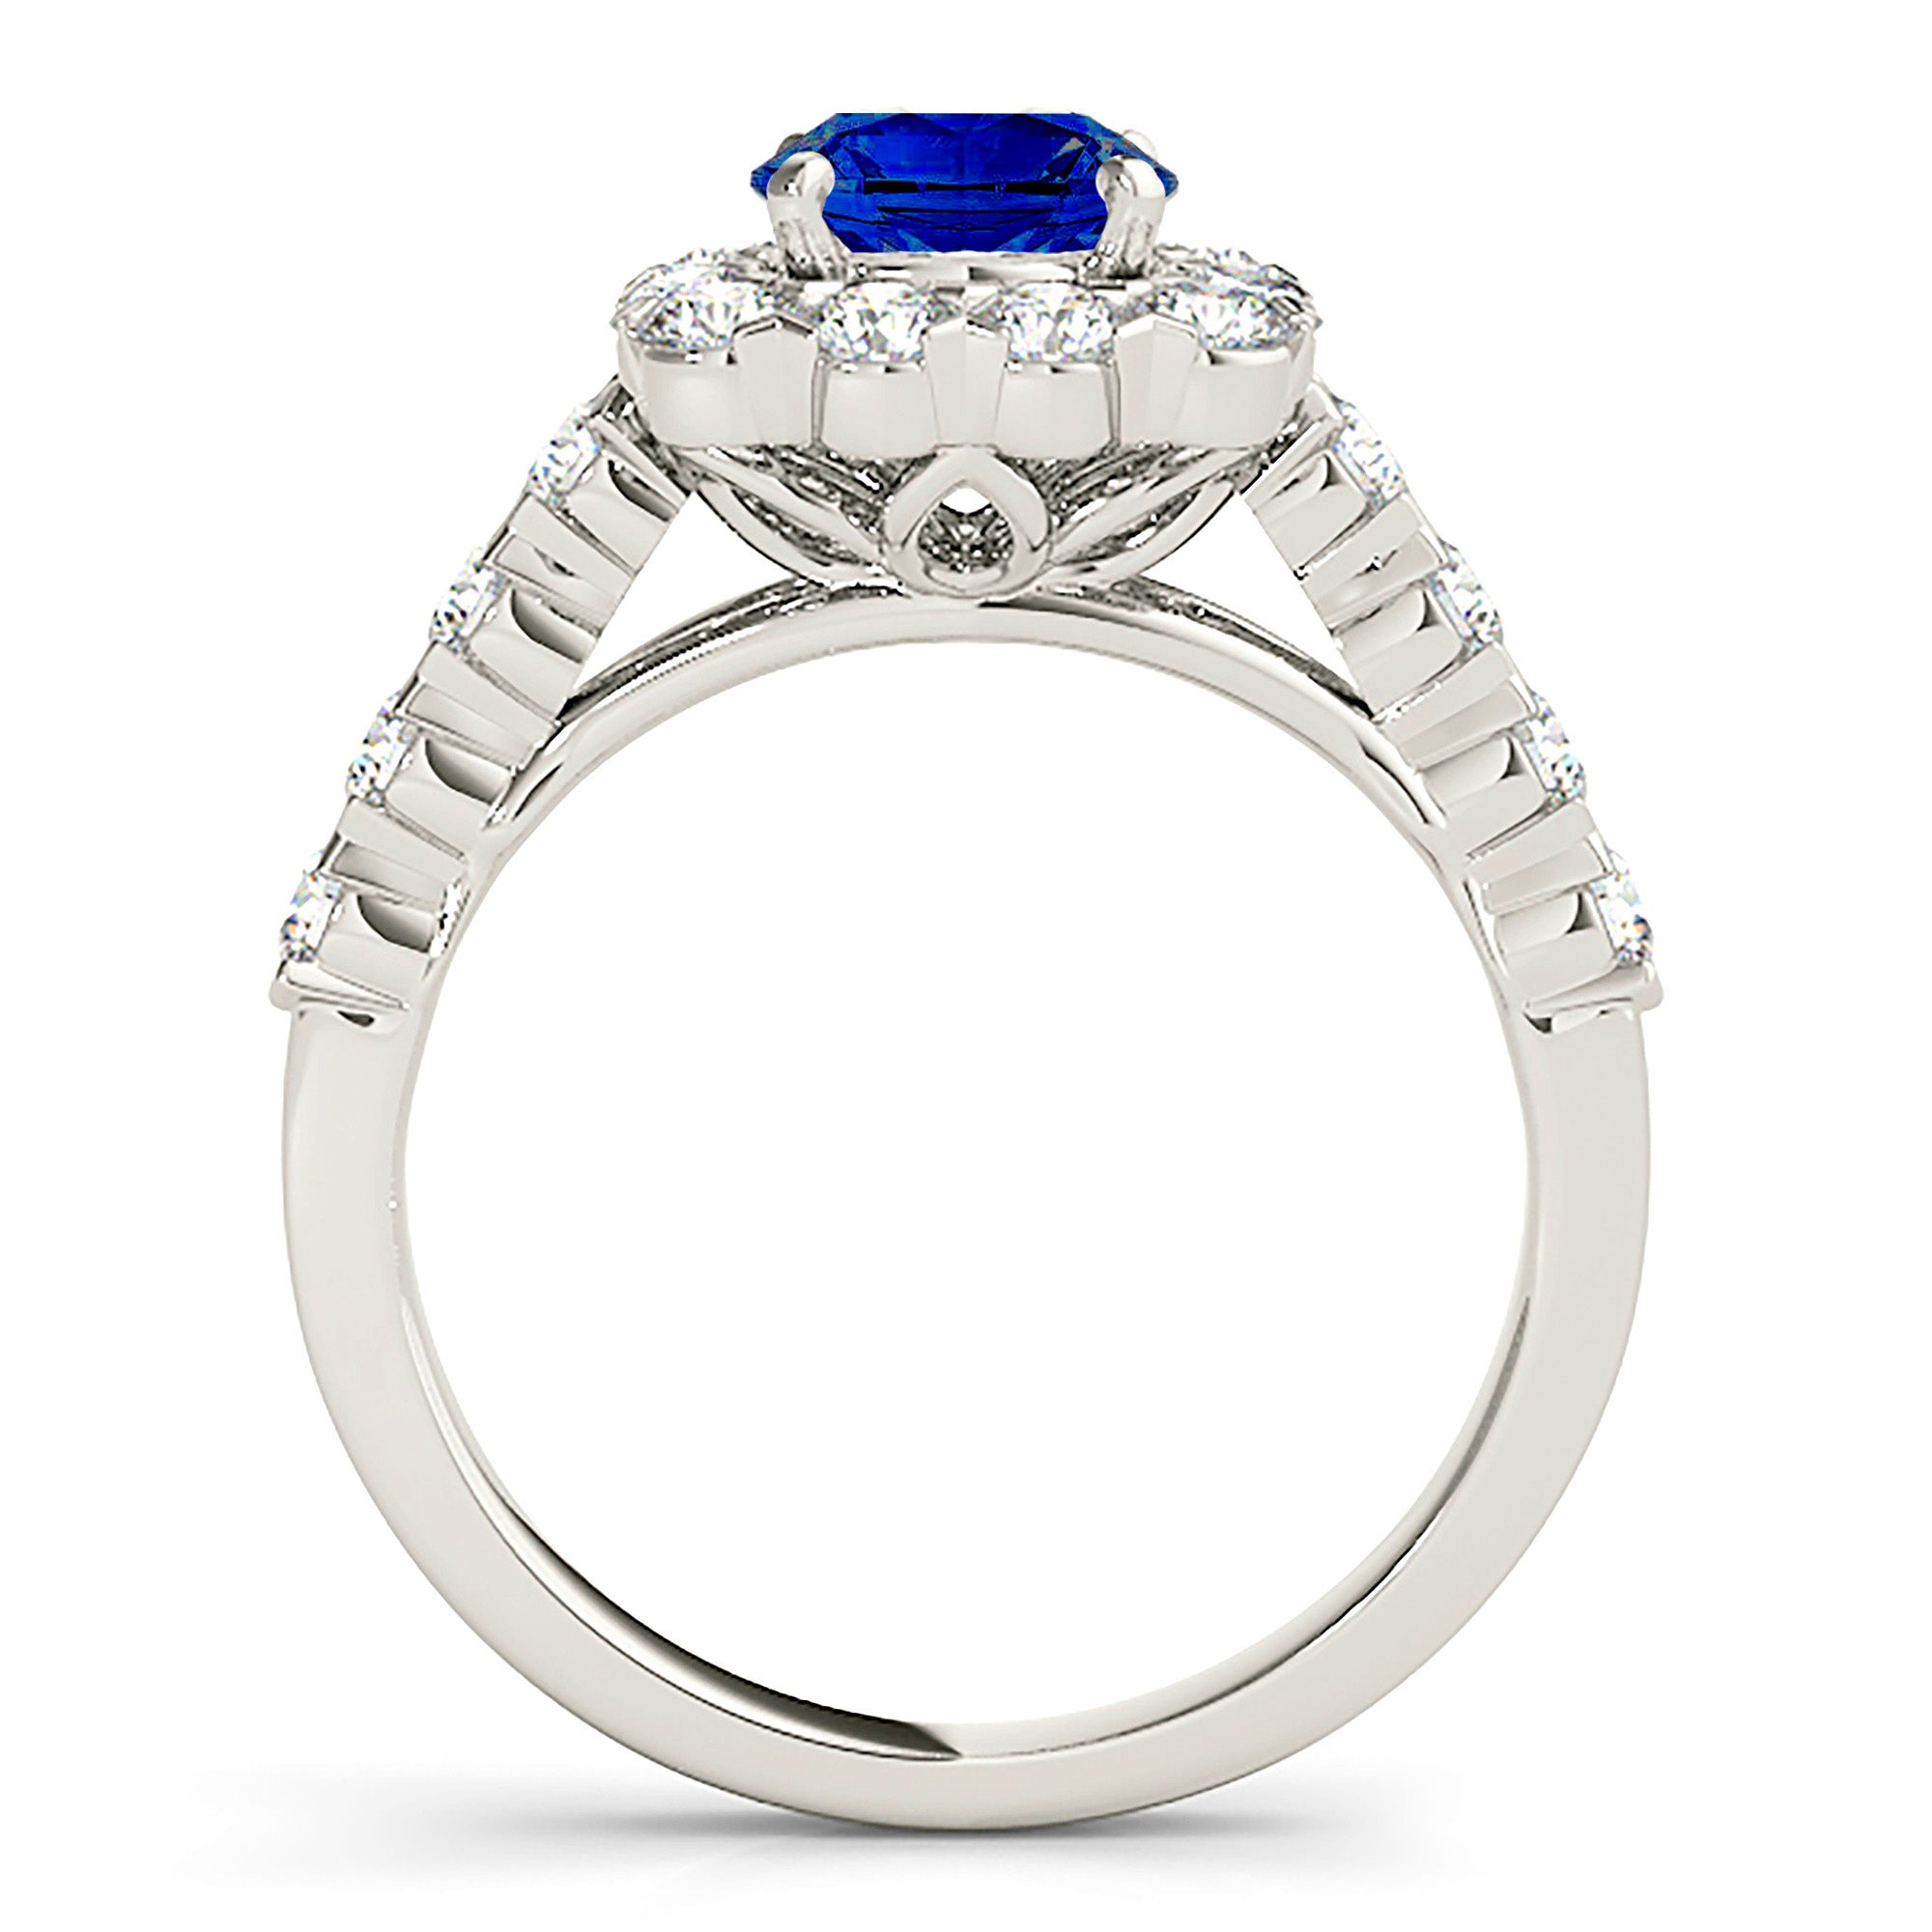 2.41 ct. Genuine Blue Sapphire Halo Ring with 1.35 ctw. Side Diamonds-in 14K/18K White, Yellow, Rose Gold and Platinum - Christmas Jewelry Gift -VIRABYANI